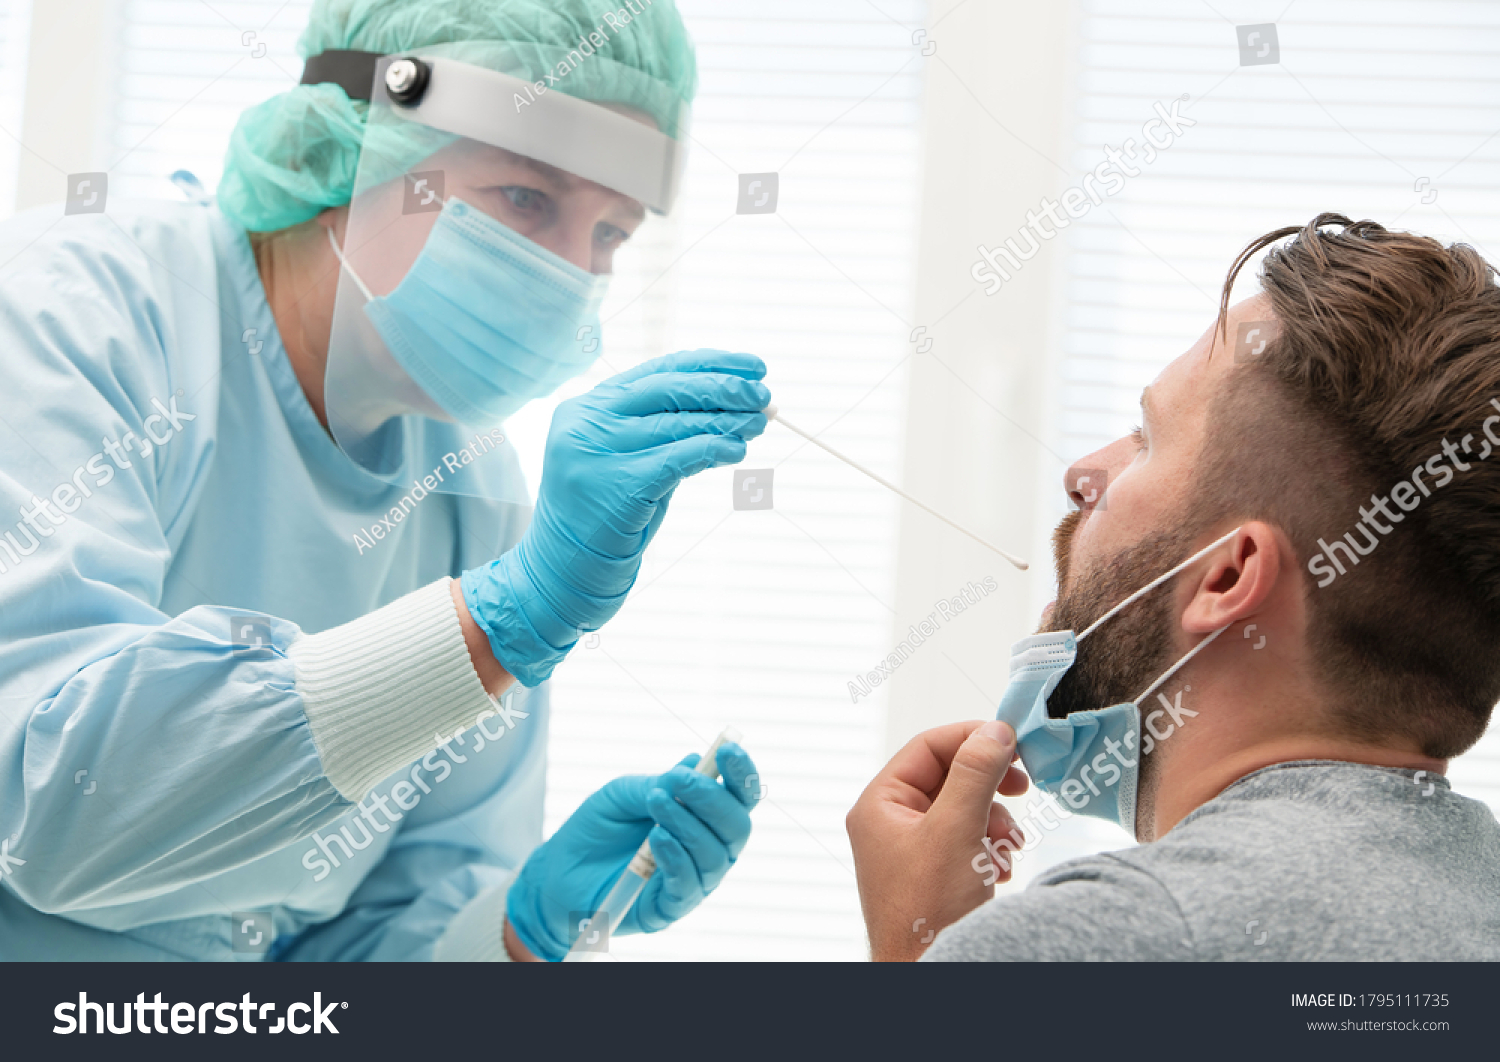 Doctor in a protective suit taking a throat and nasal swab from a patient to test for possible coronavirus infection #1795111735